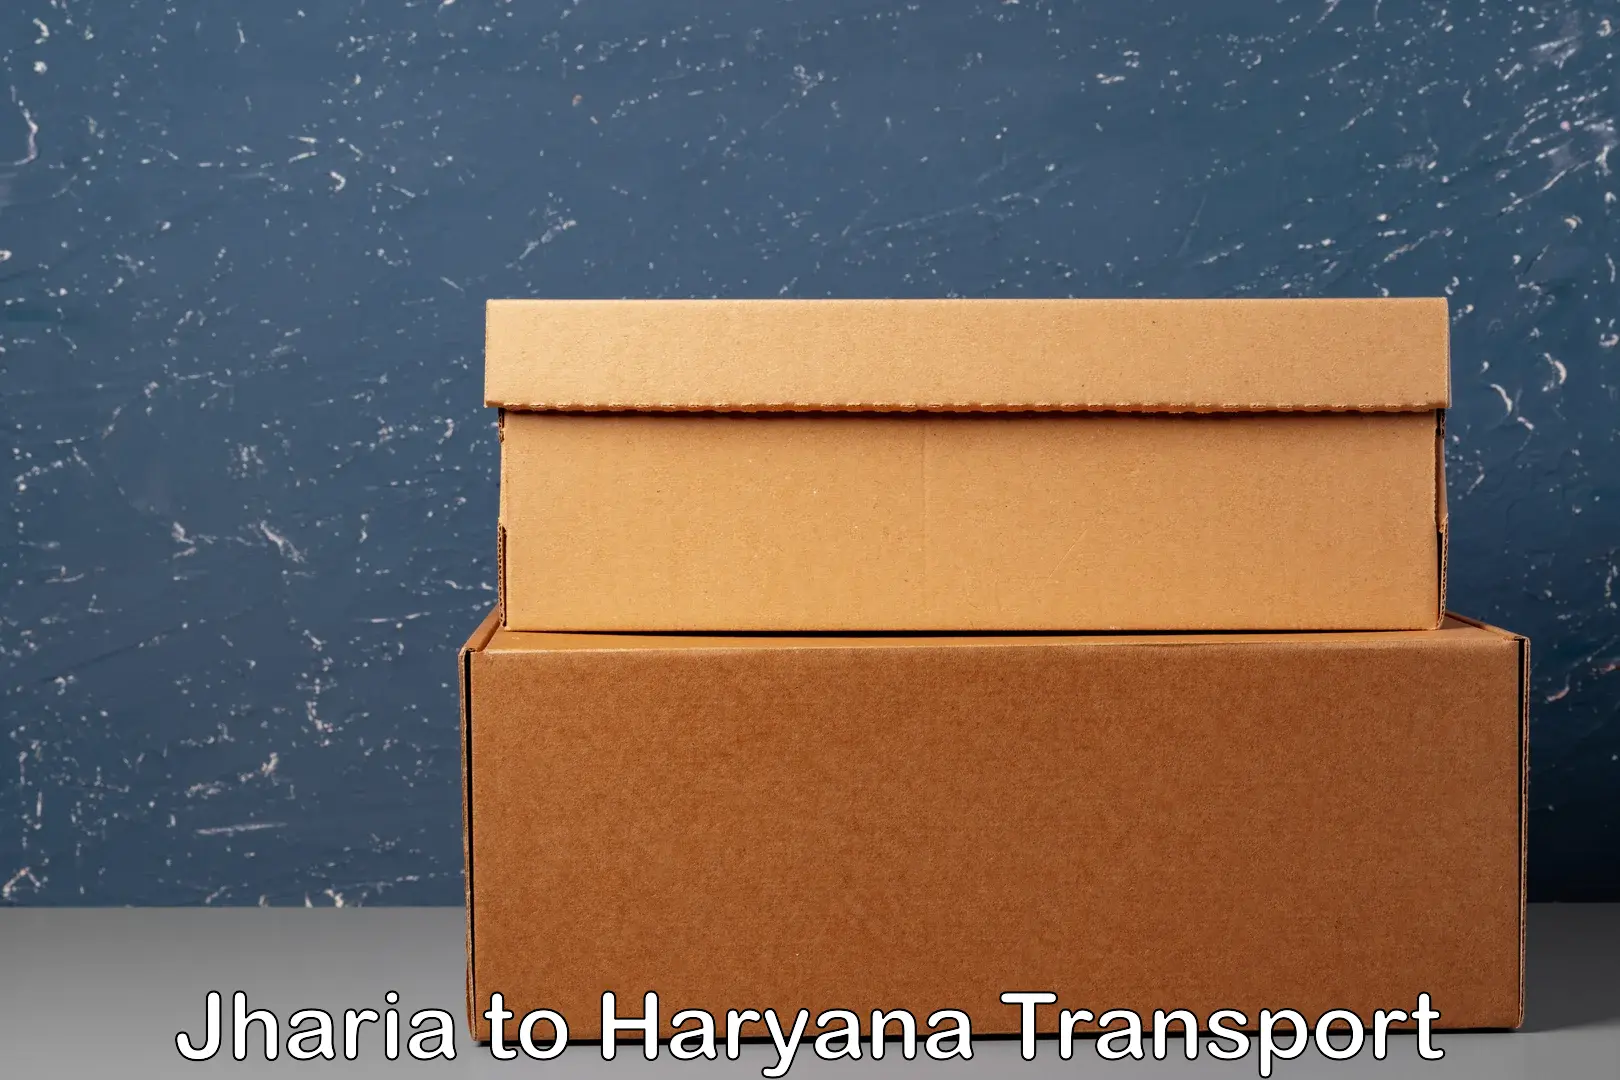 Nationwide transport services Jharia to Haryana